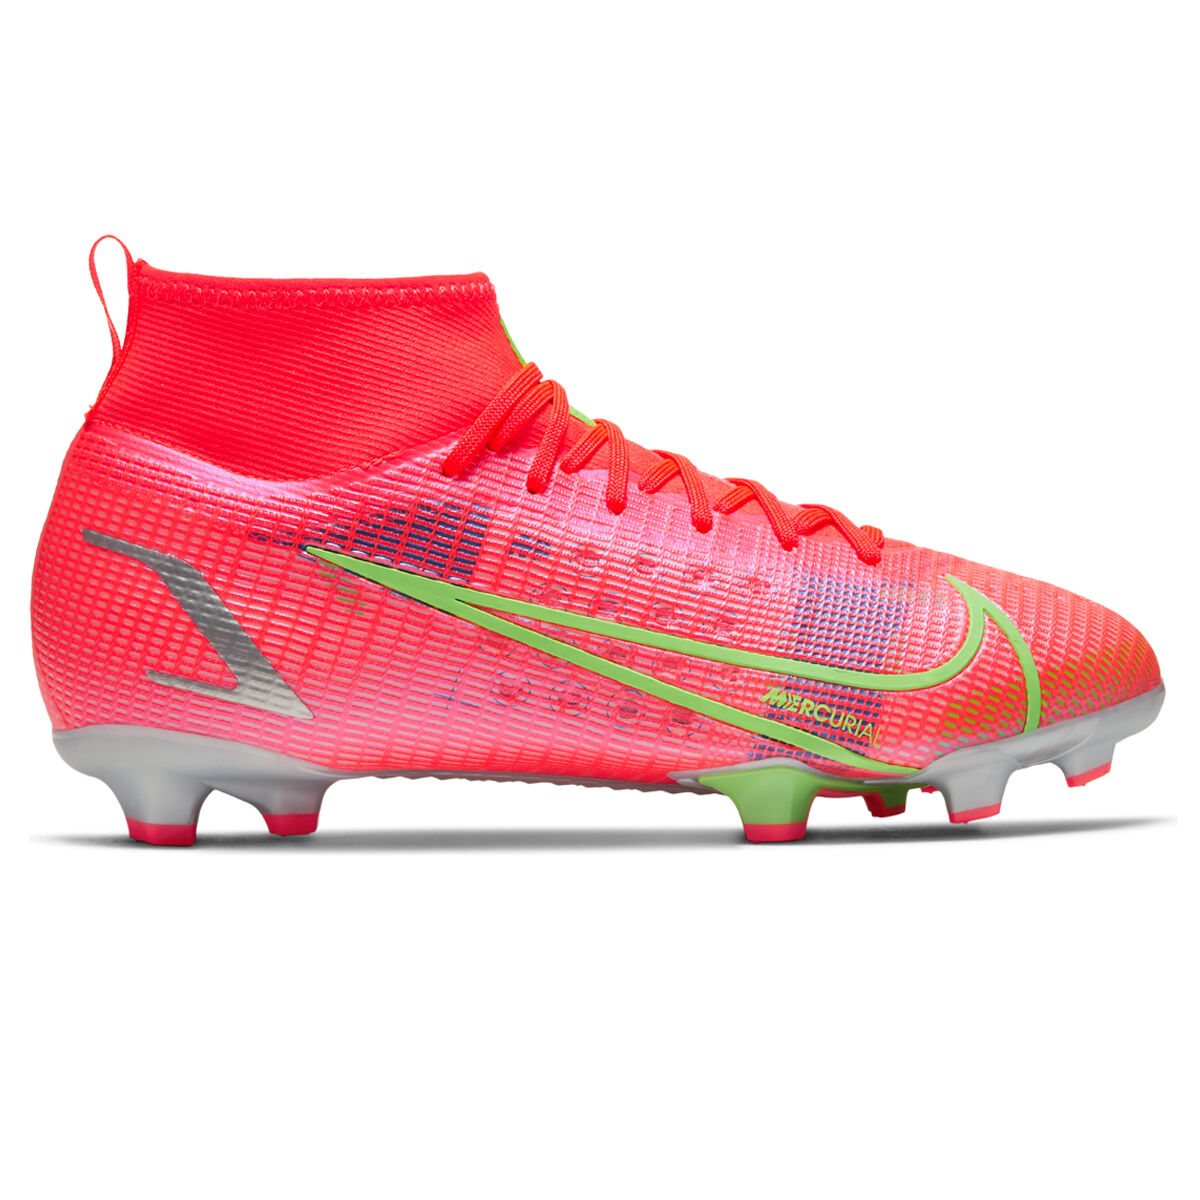 mercurial superfly boots